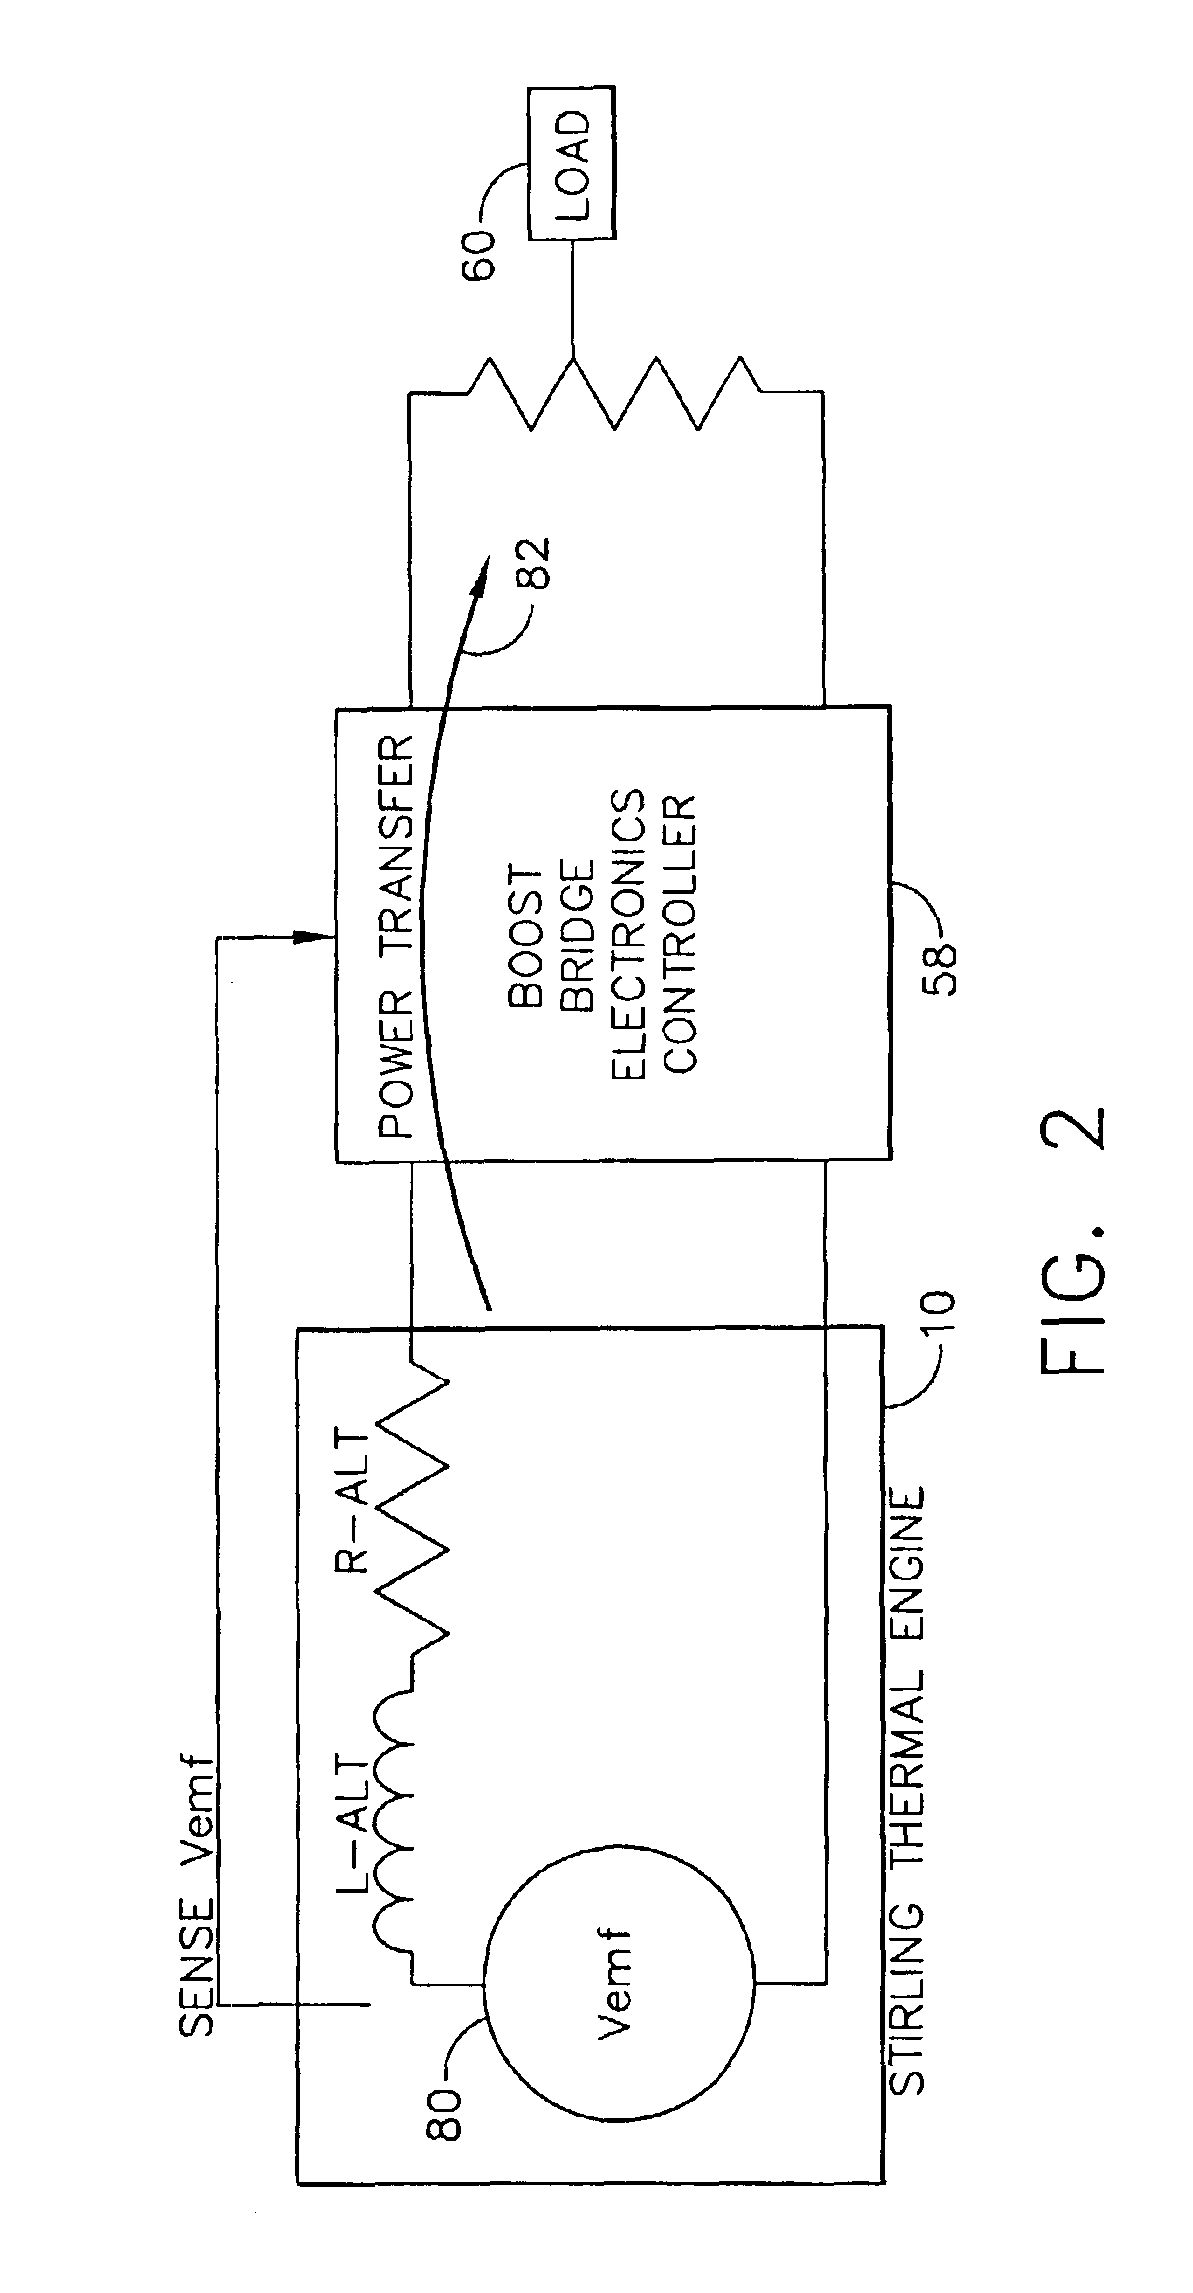 Thermal cycle engine boost bridge power interface